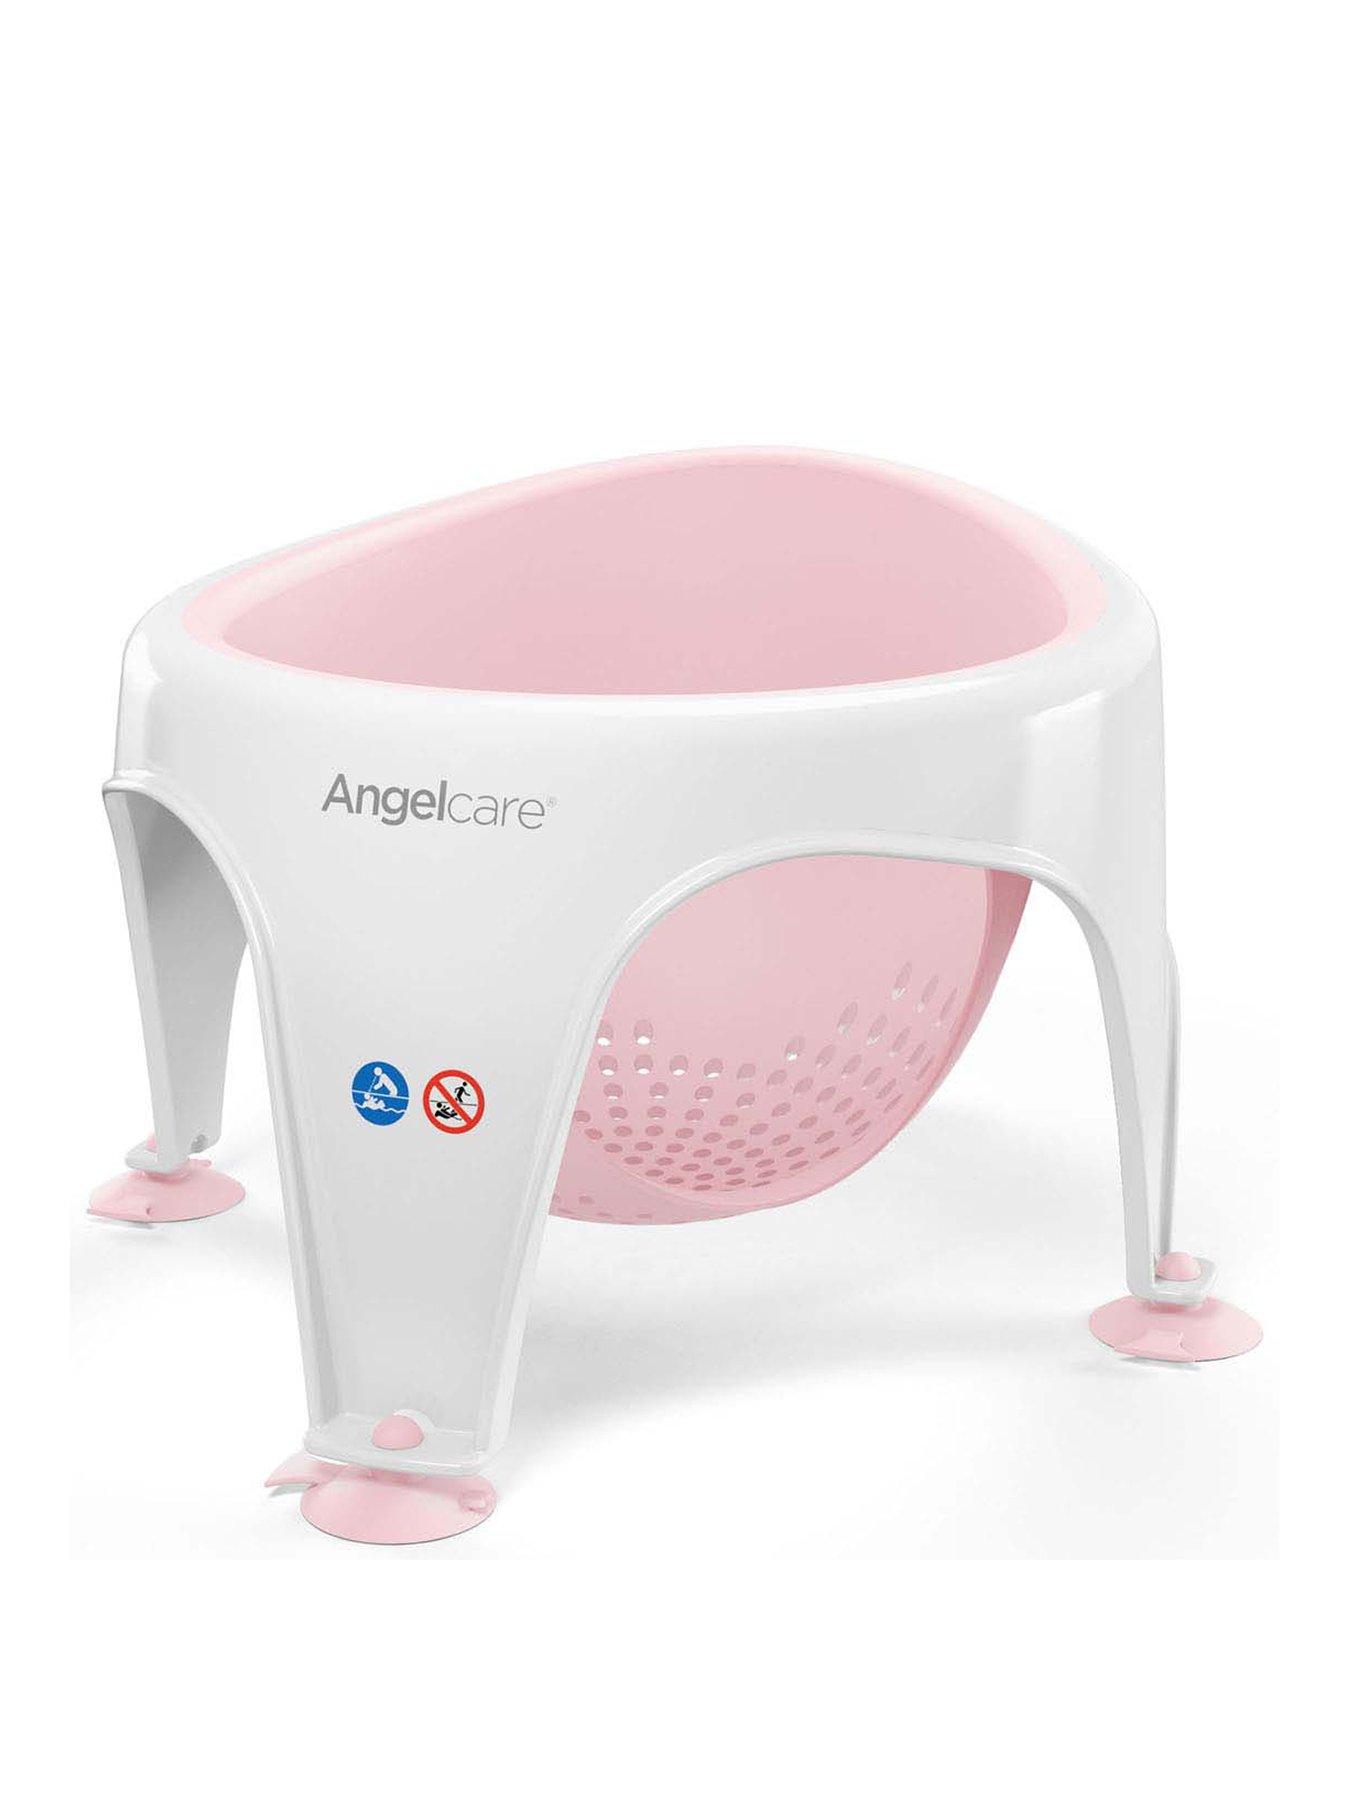 Angelcare Plastic Baby Bath Support, Pink, Unisex 